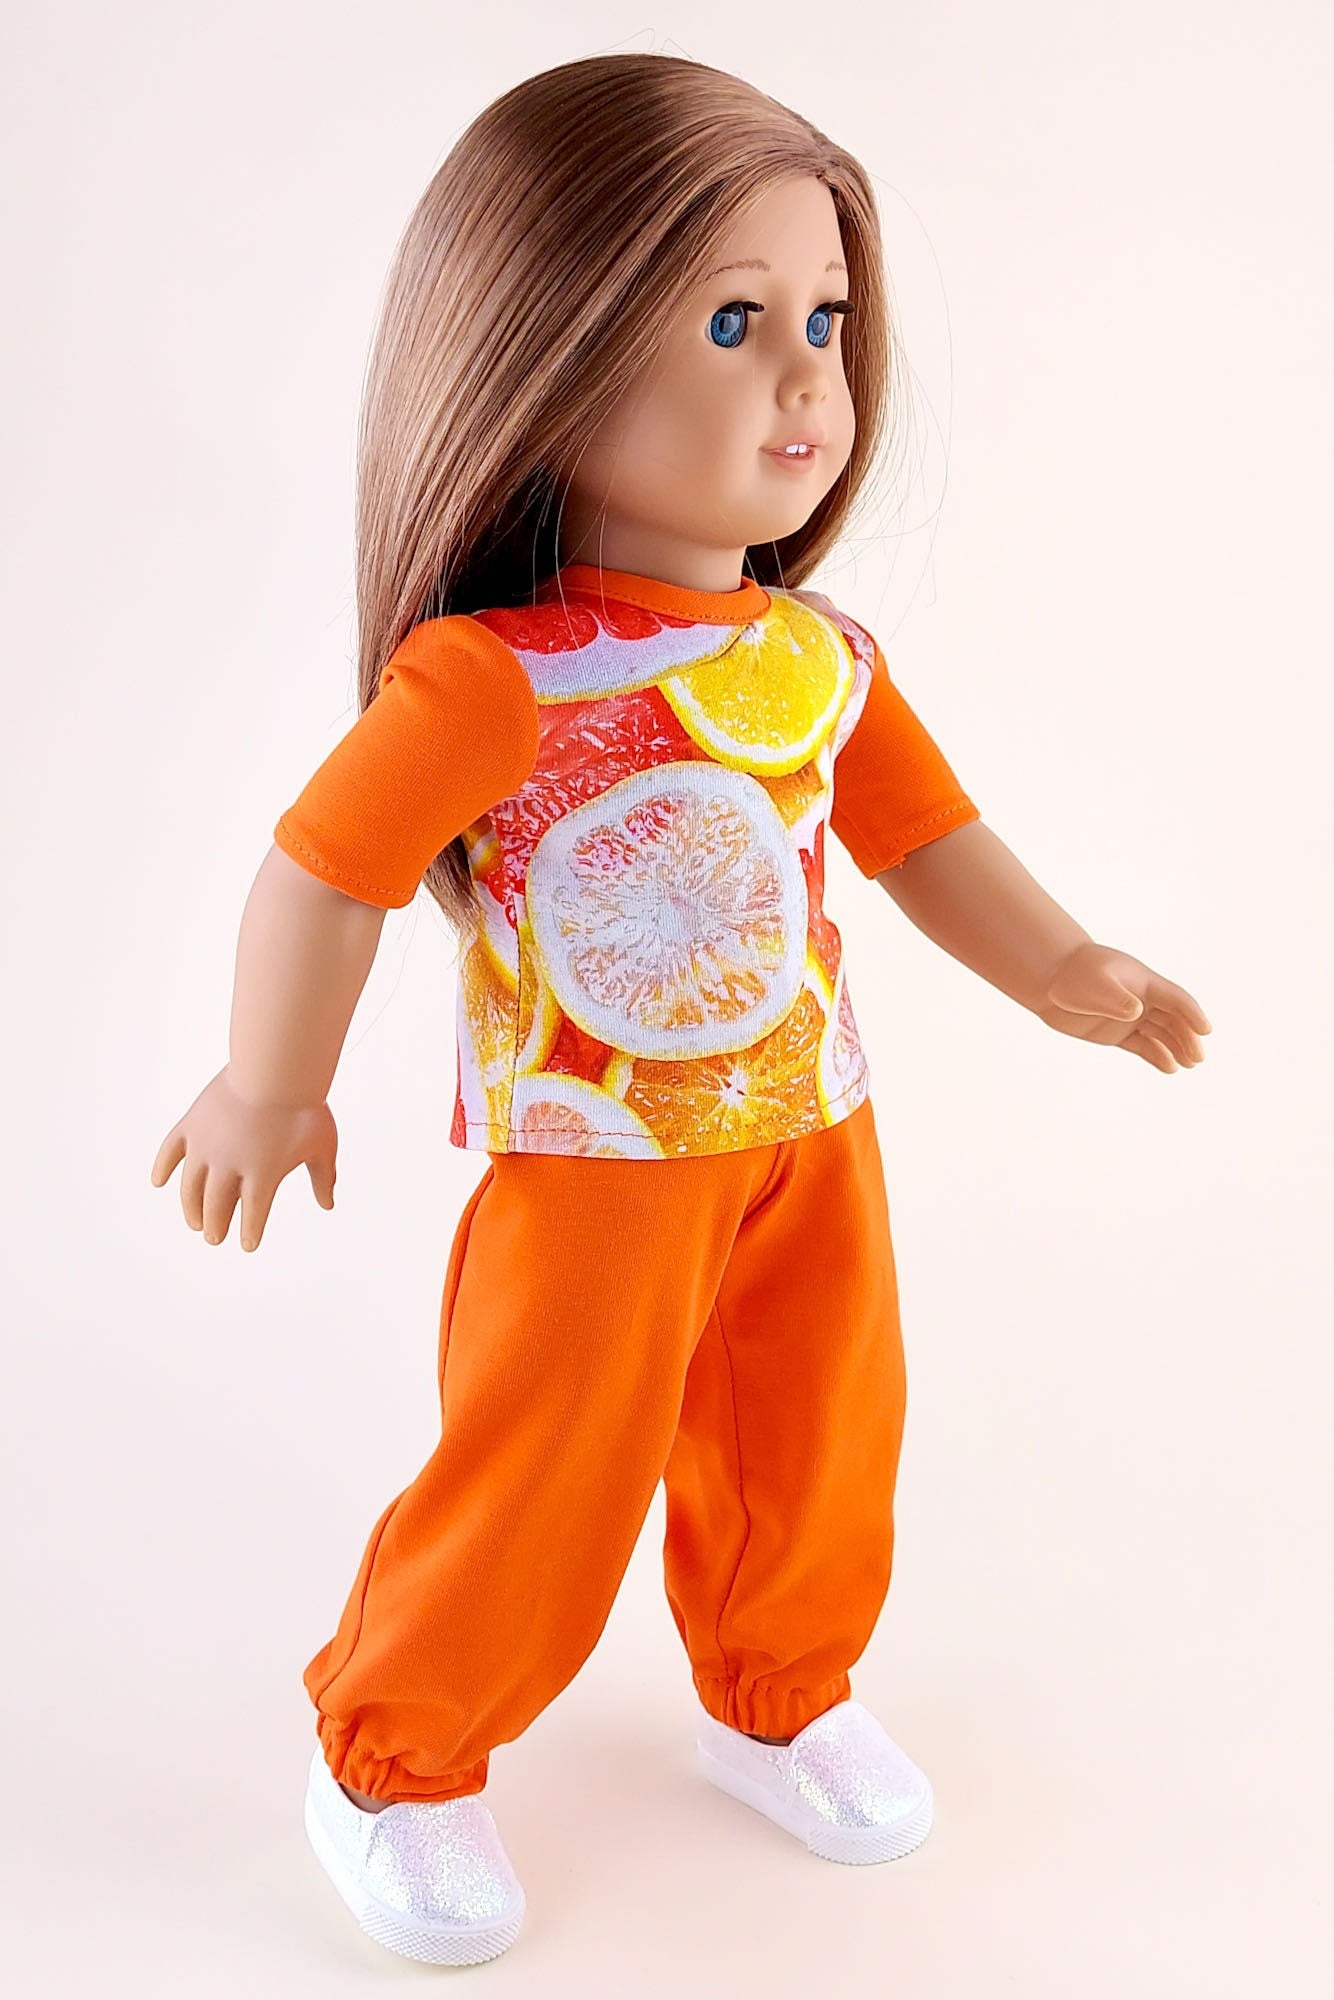 American Girl Doll Pajama Orange Sweatpants and T-shirt for Dolls 18 Inch  Doll Clothes